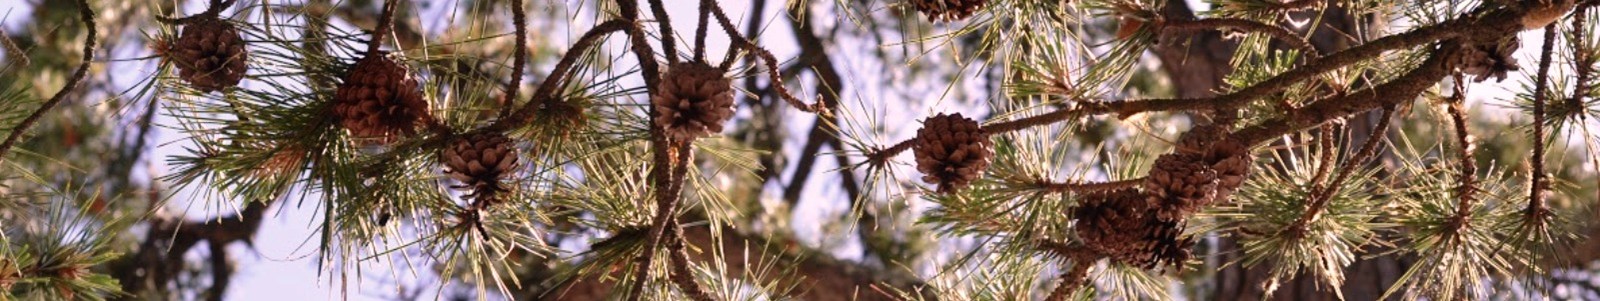 pine_cone_banner_3